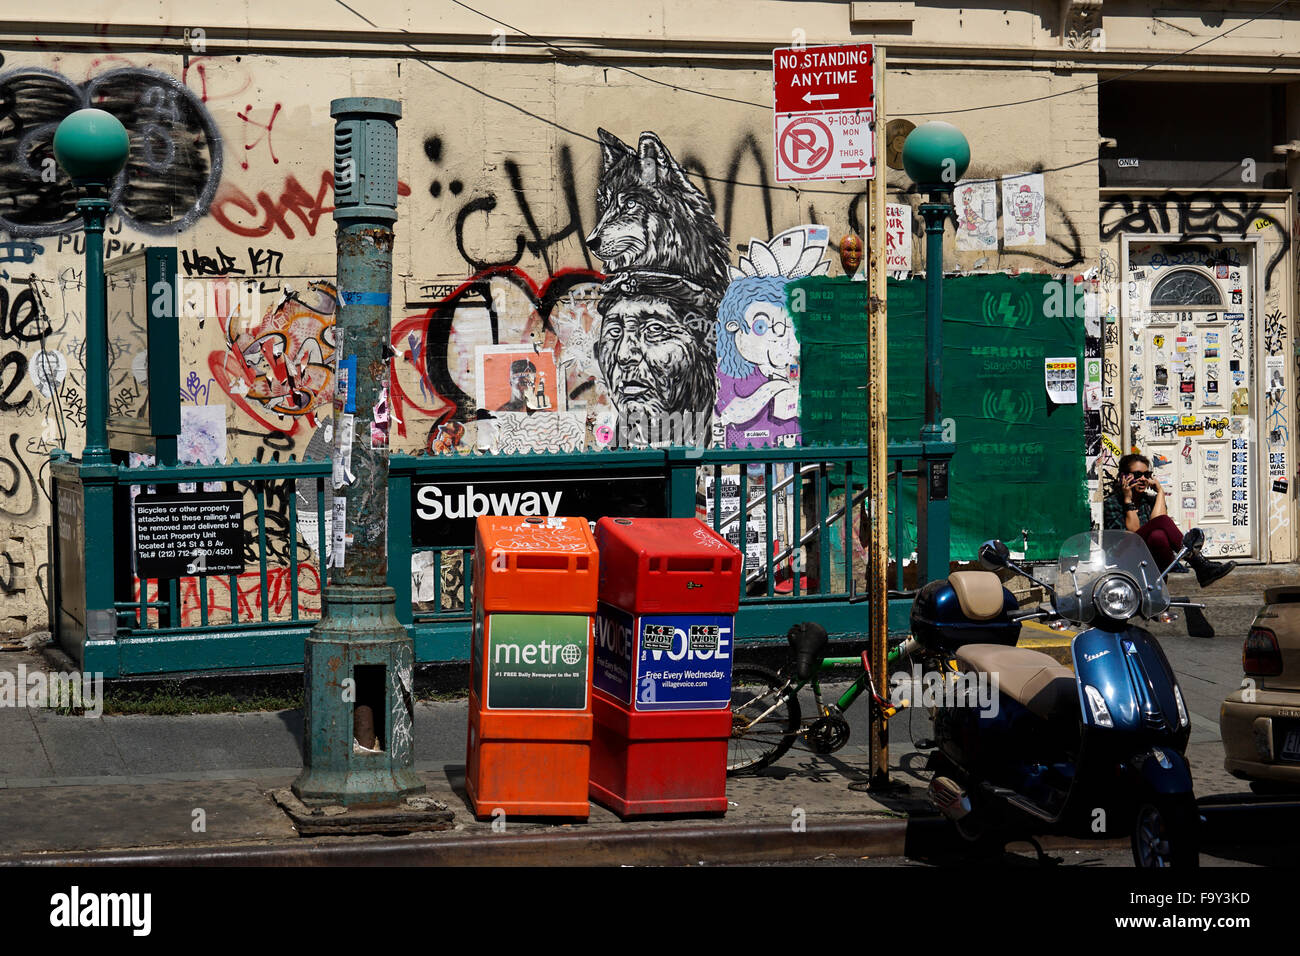 New York City subway station with graffiti in the background and parked bike, scooter and newspaper stand in the foreground USA Stock Photo